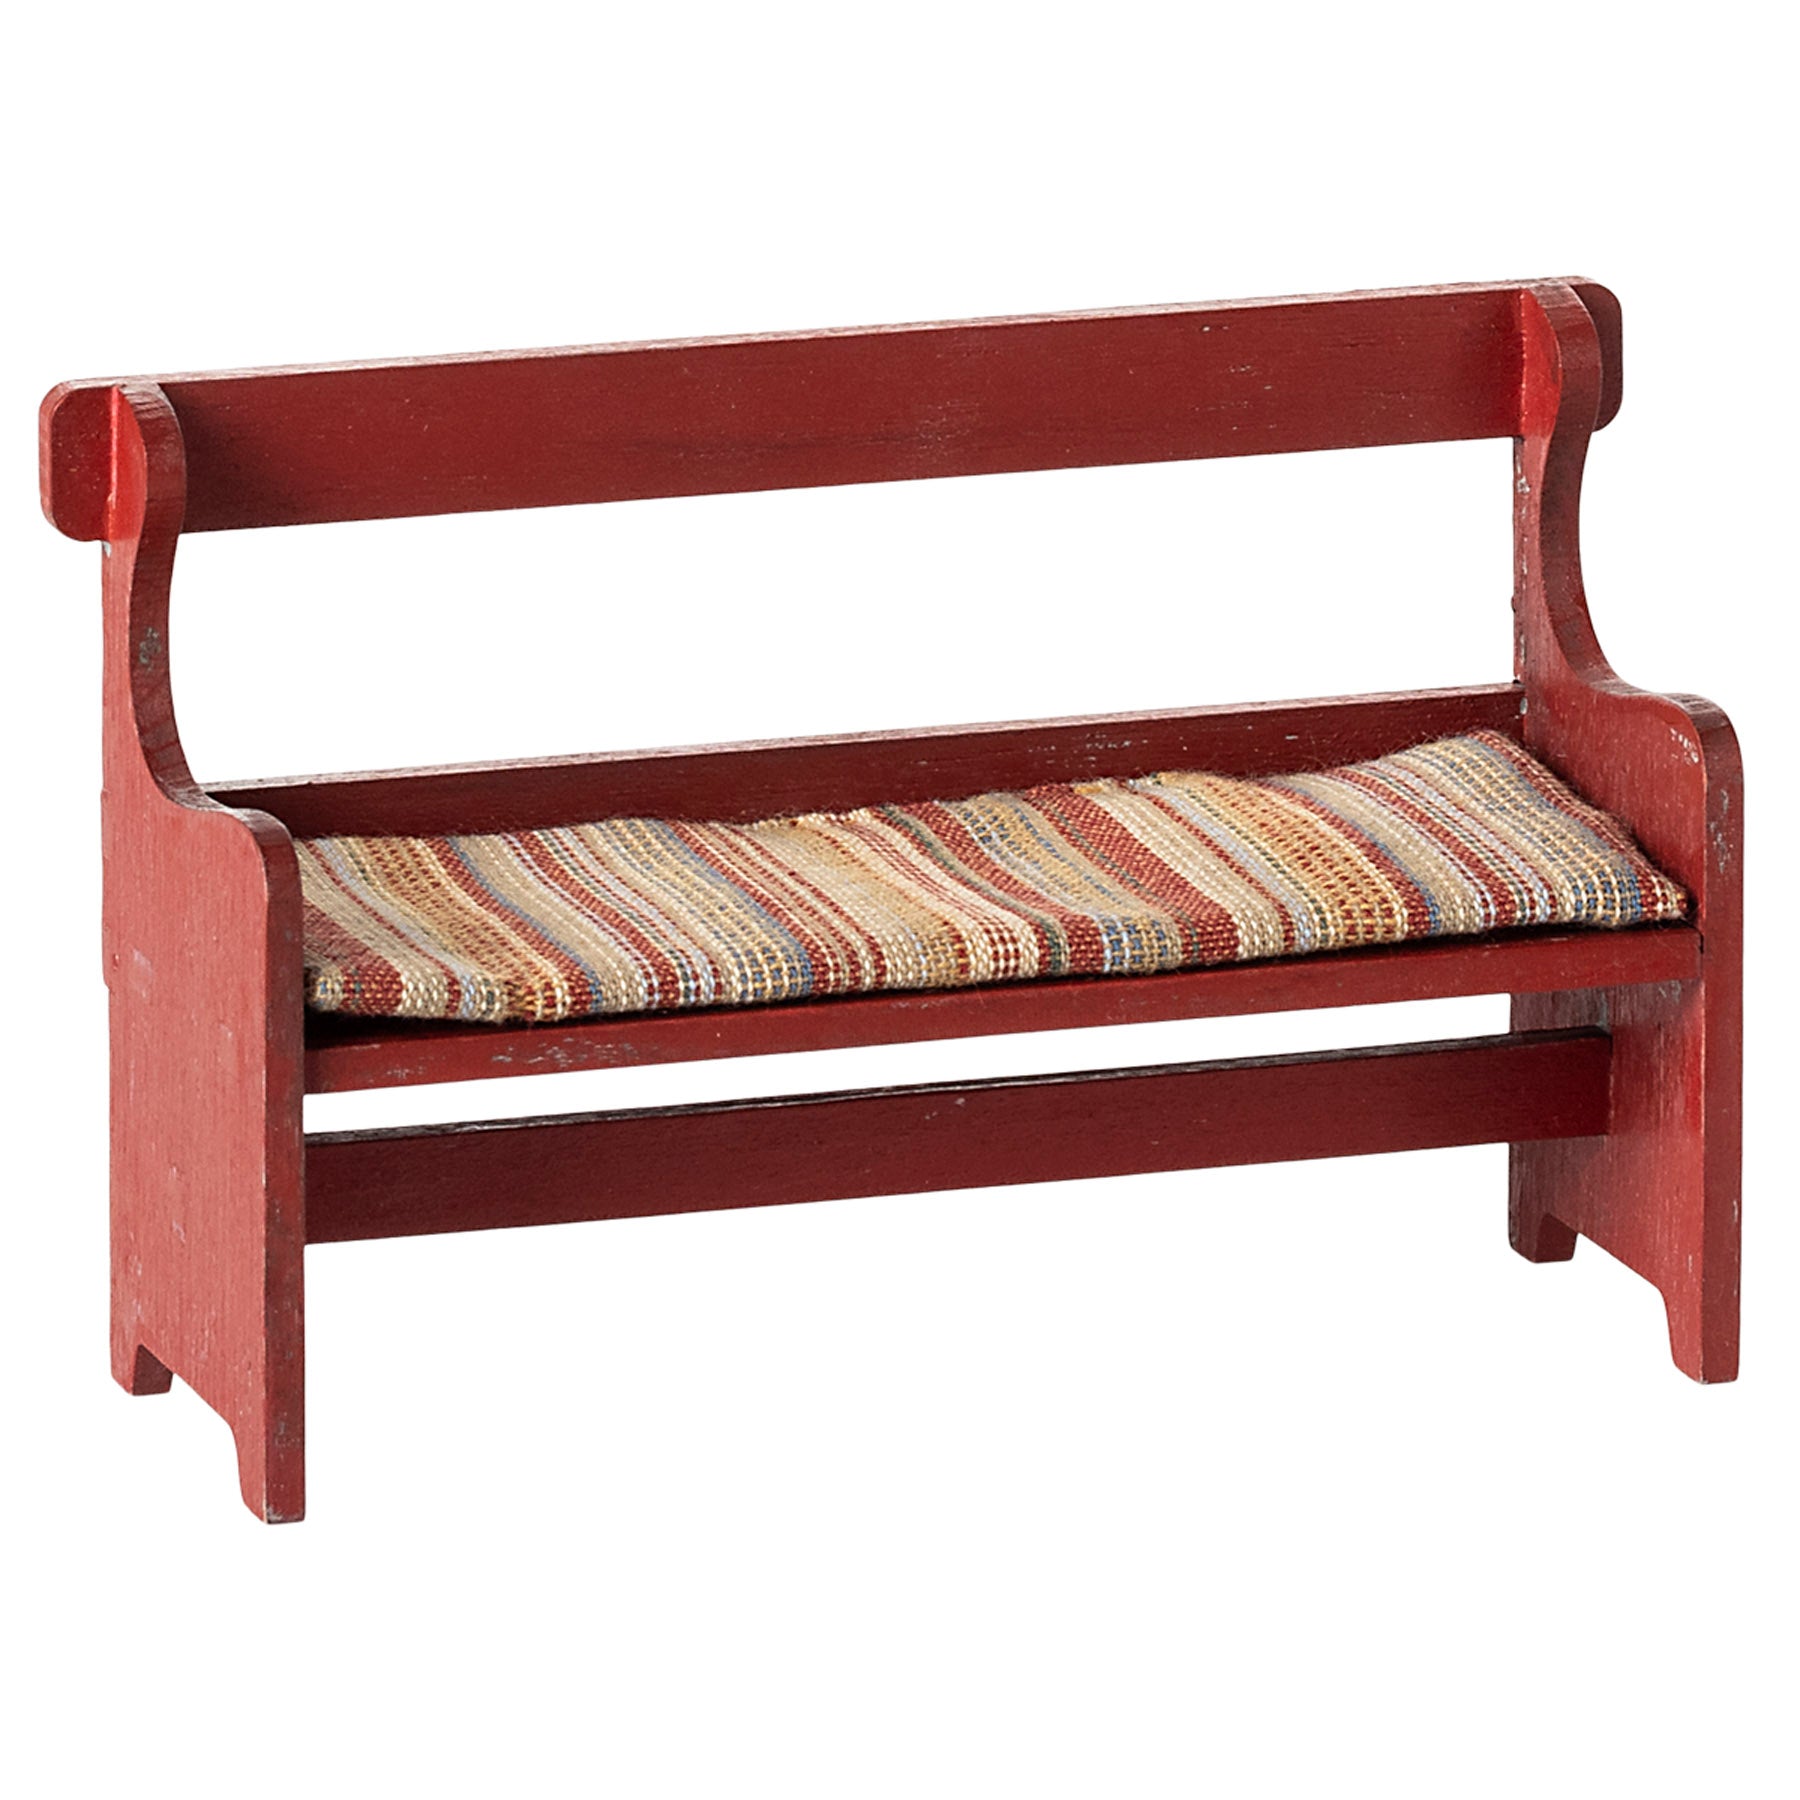 maileg red shaby chic painted bench with a striped cushion. bigger enough for 2 or 3 mice 